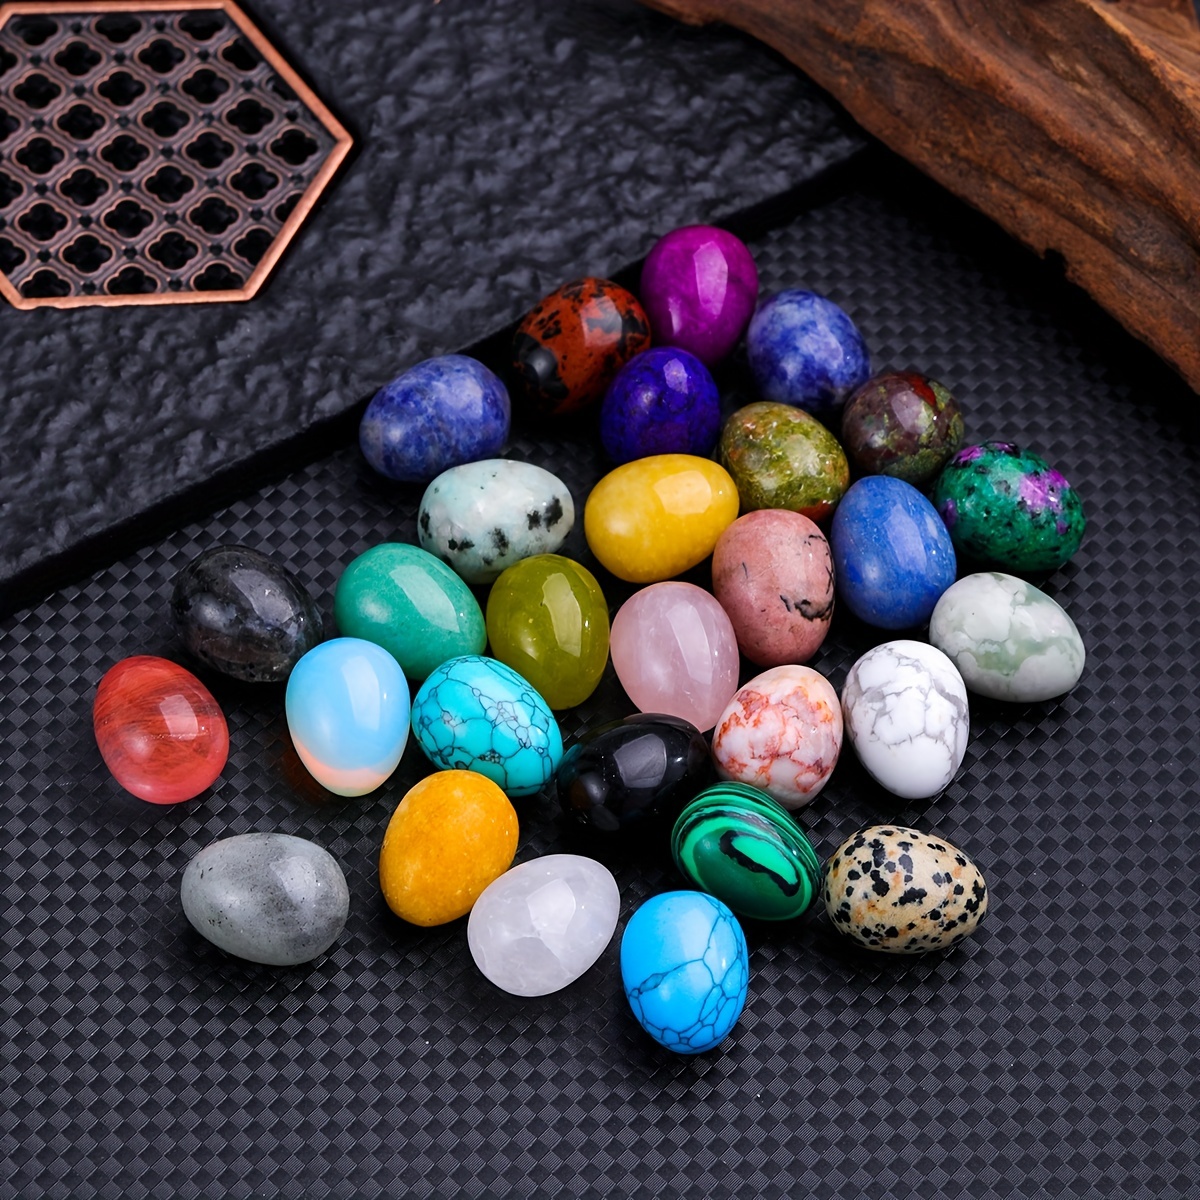 Travelwant Thinking Egg, Natural Thumb Worry Stone Hand Carved Crystals and Healing Stones for Anxiety and Stress Relief Meditation Water Drop Palm